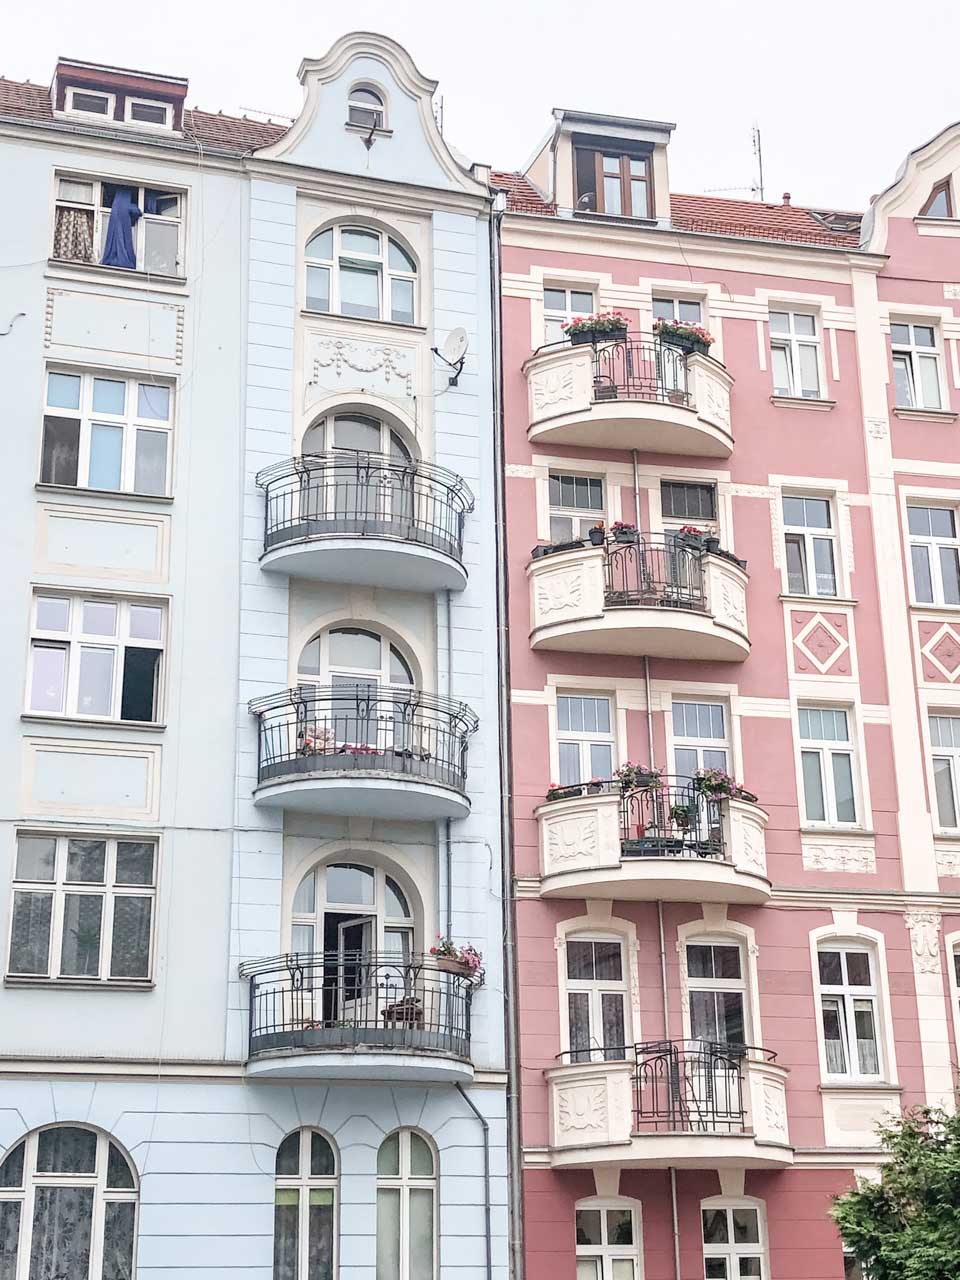 The exterior of two pastel blue and pink houses in Wrocław, Poland